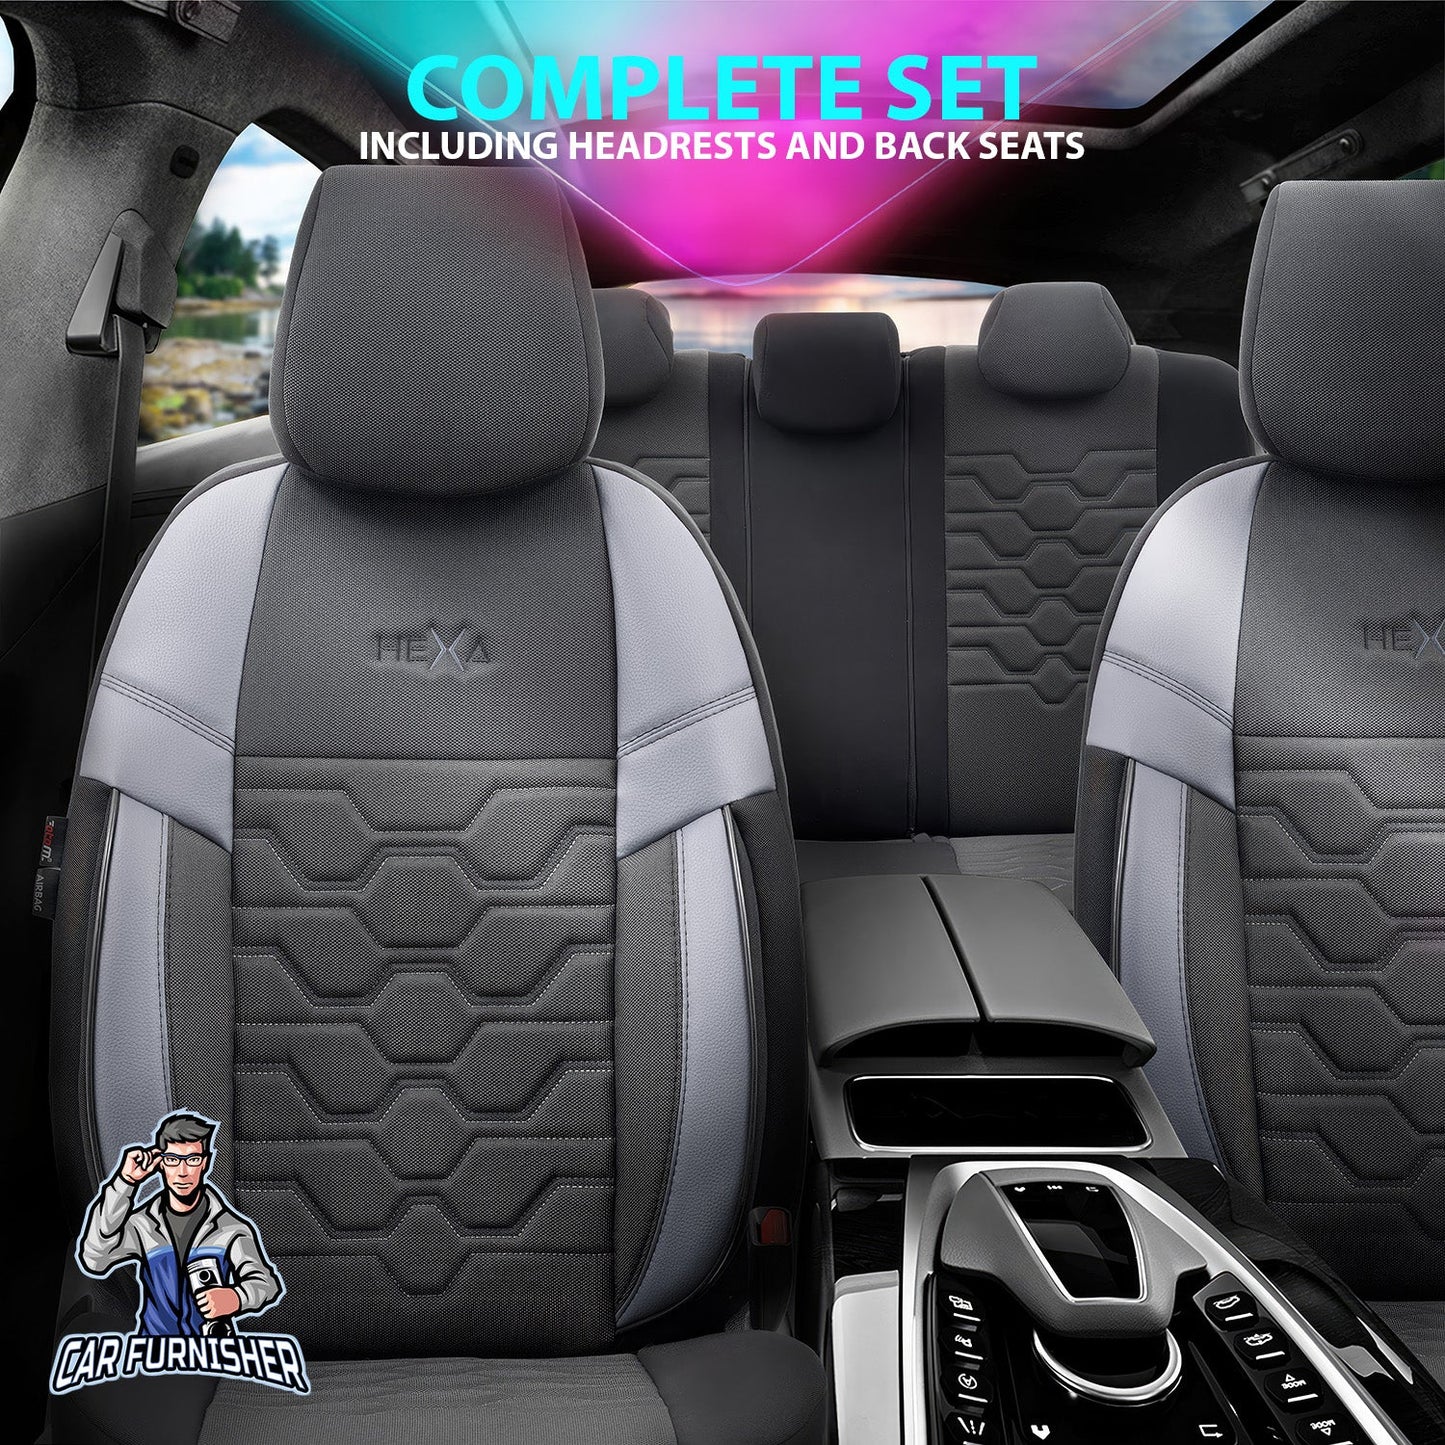 Mercedes 190 Seat Covers Hexa Design Smoked 5 Seats + Headrests (Full Set) Leather & Jacquard Fabric